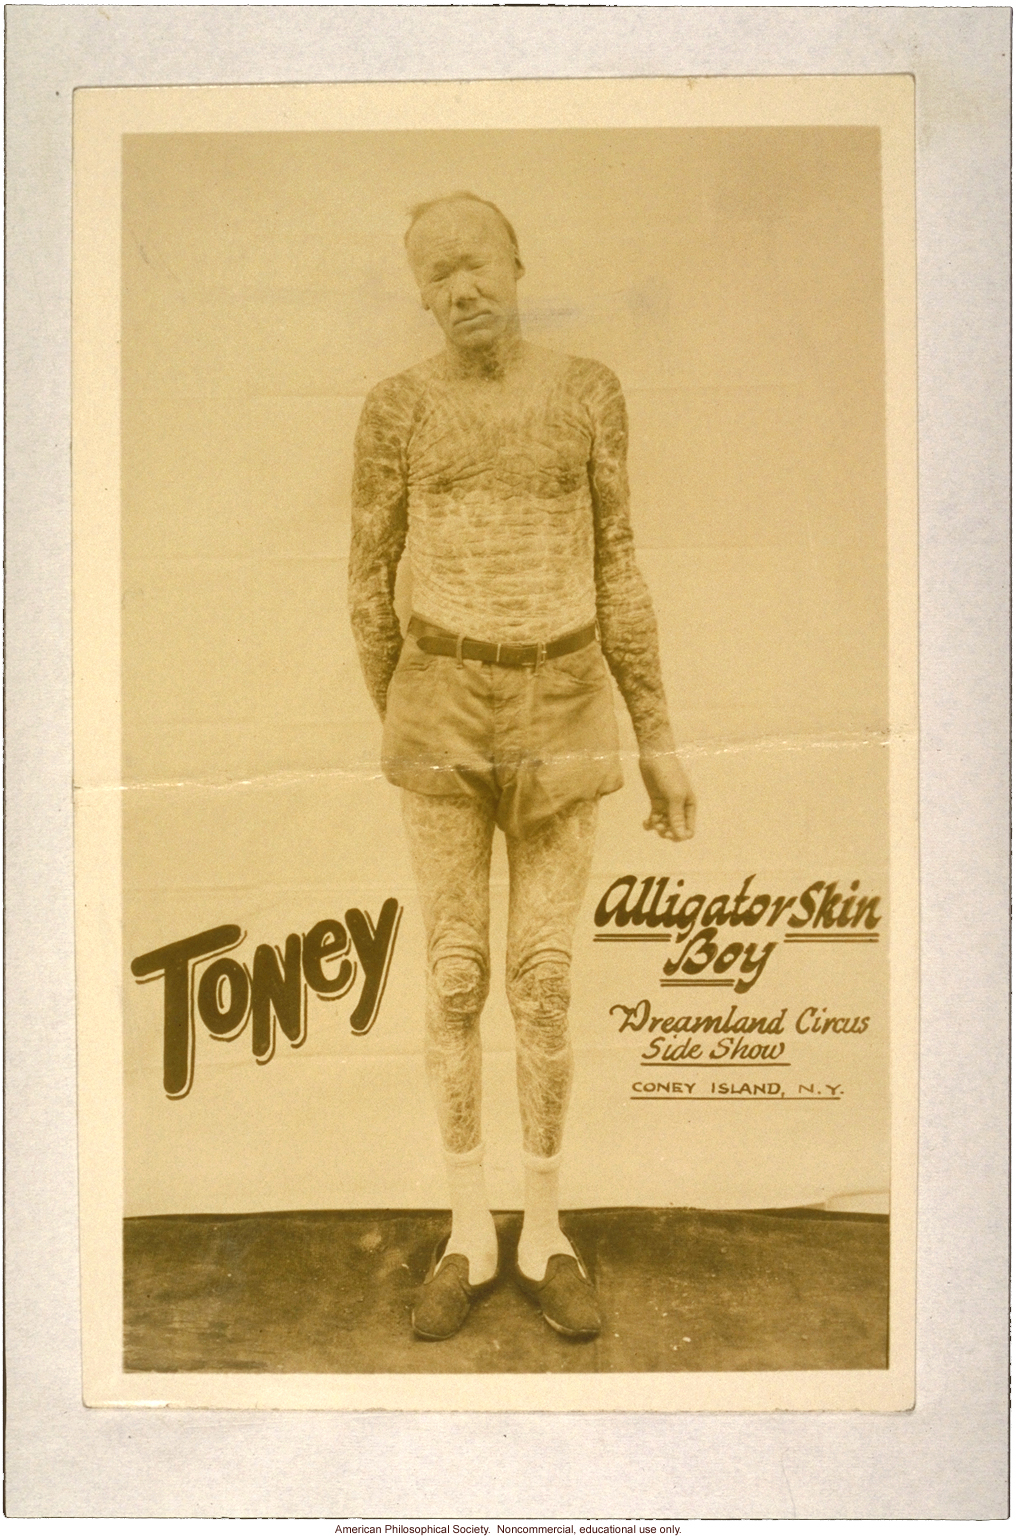 &quote;Toney, alligator skin boy, Dreamland Circus side show, Coney Island,&quote; with icthyosis a skin trait